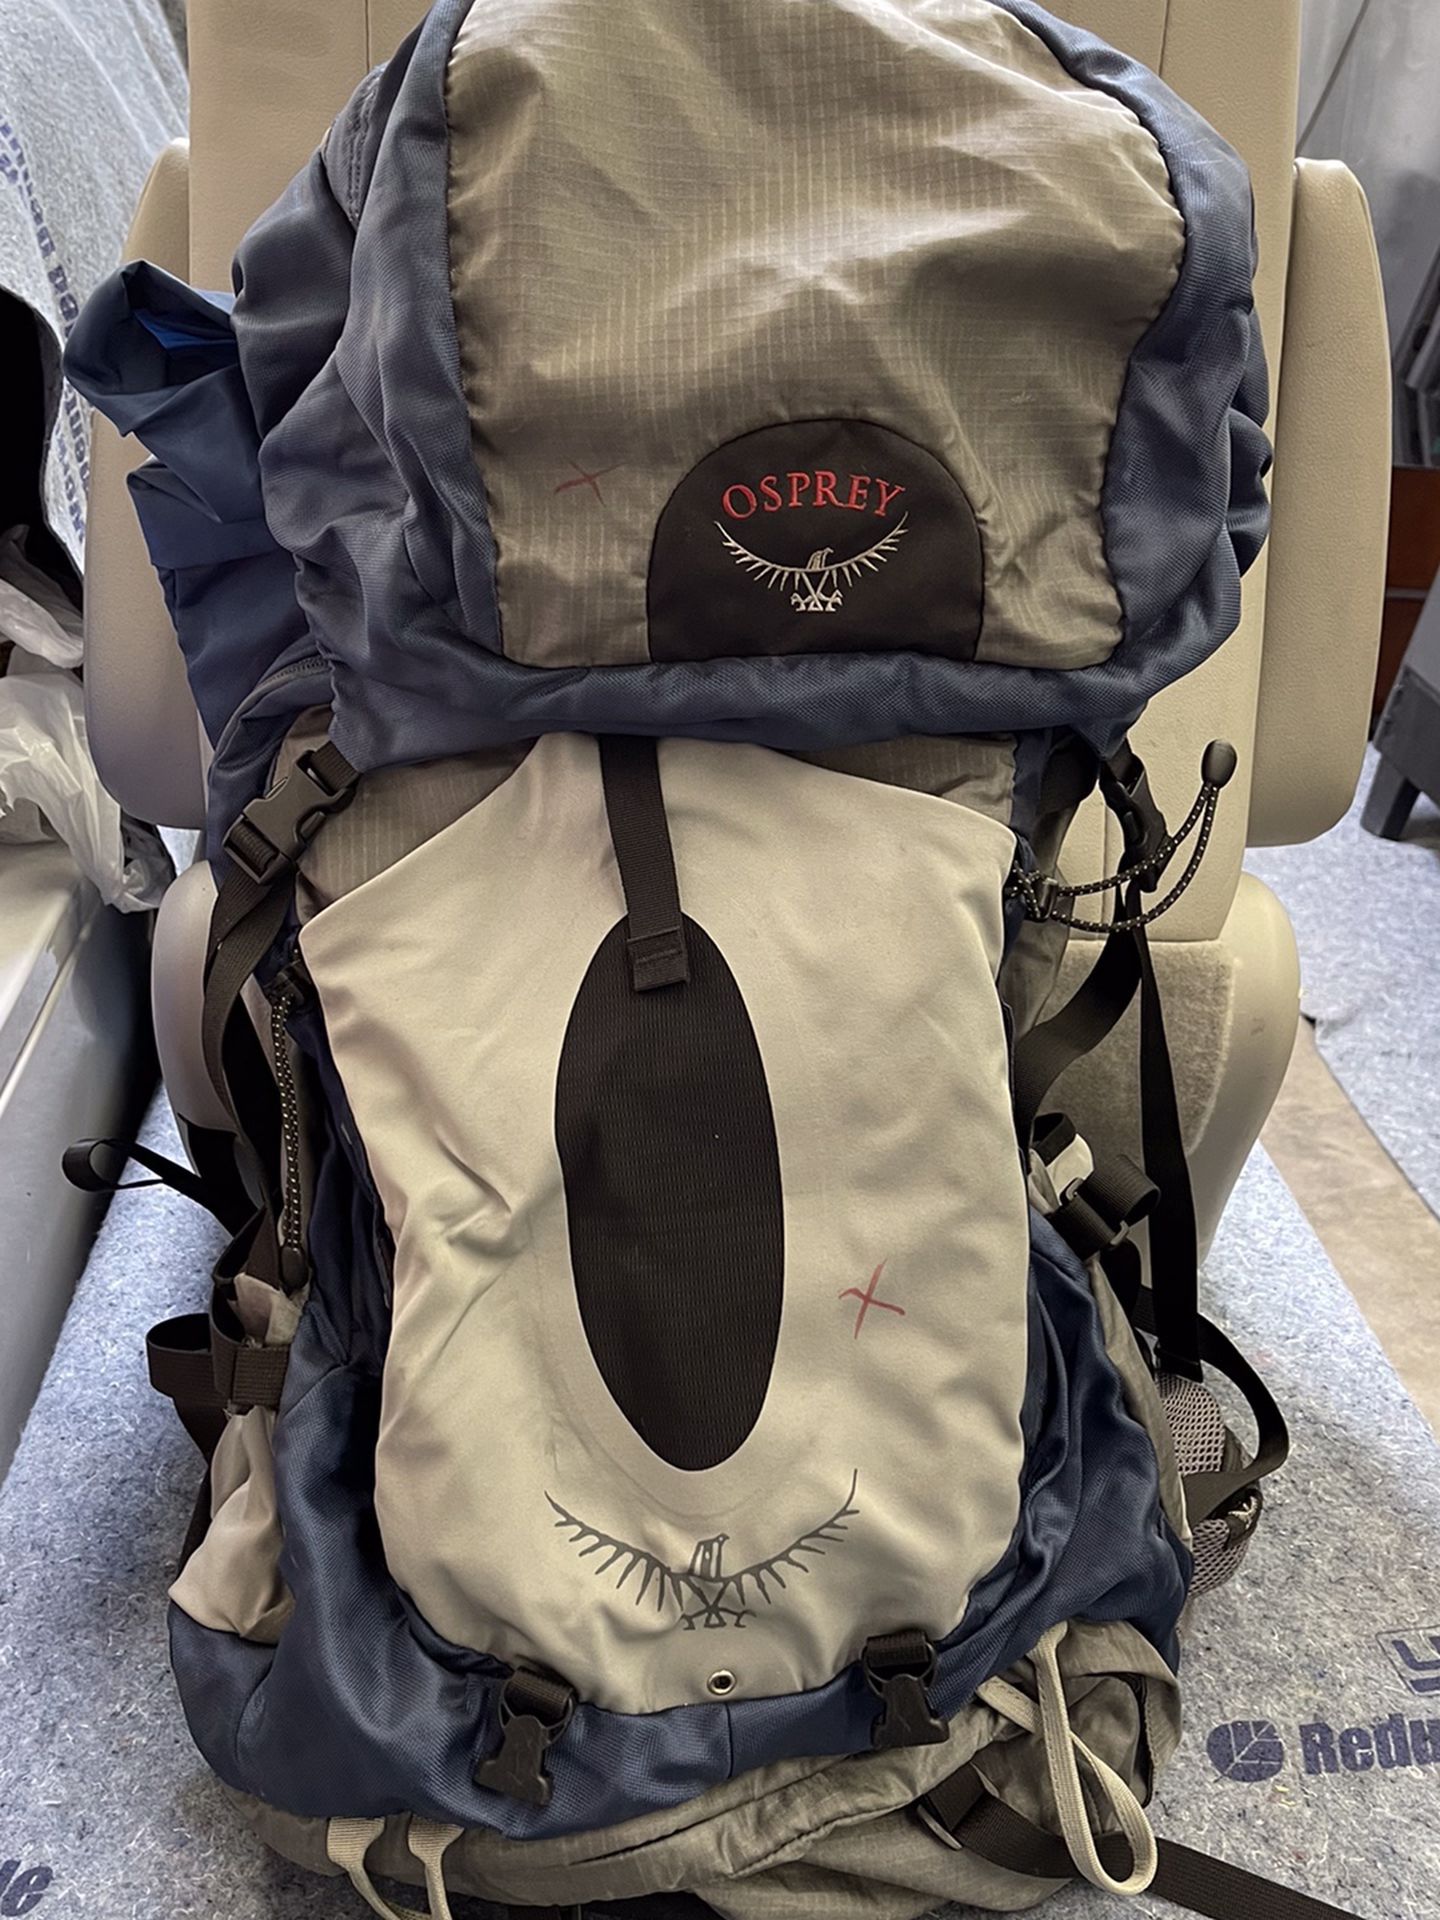 Osprey Atmos 65 Hiking Backpack In Very Good Condition